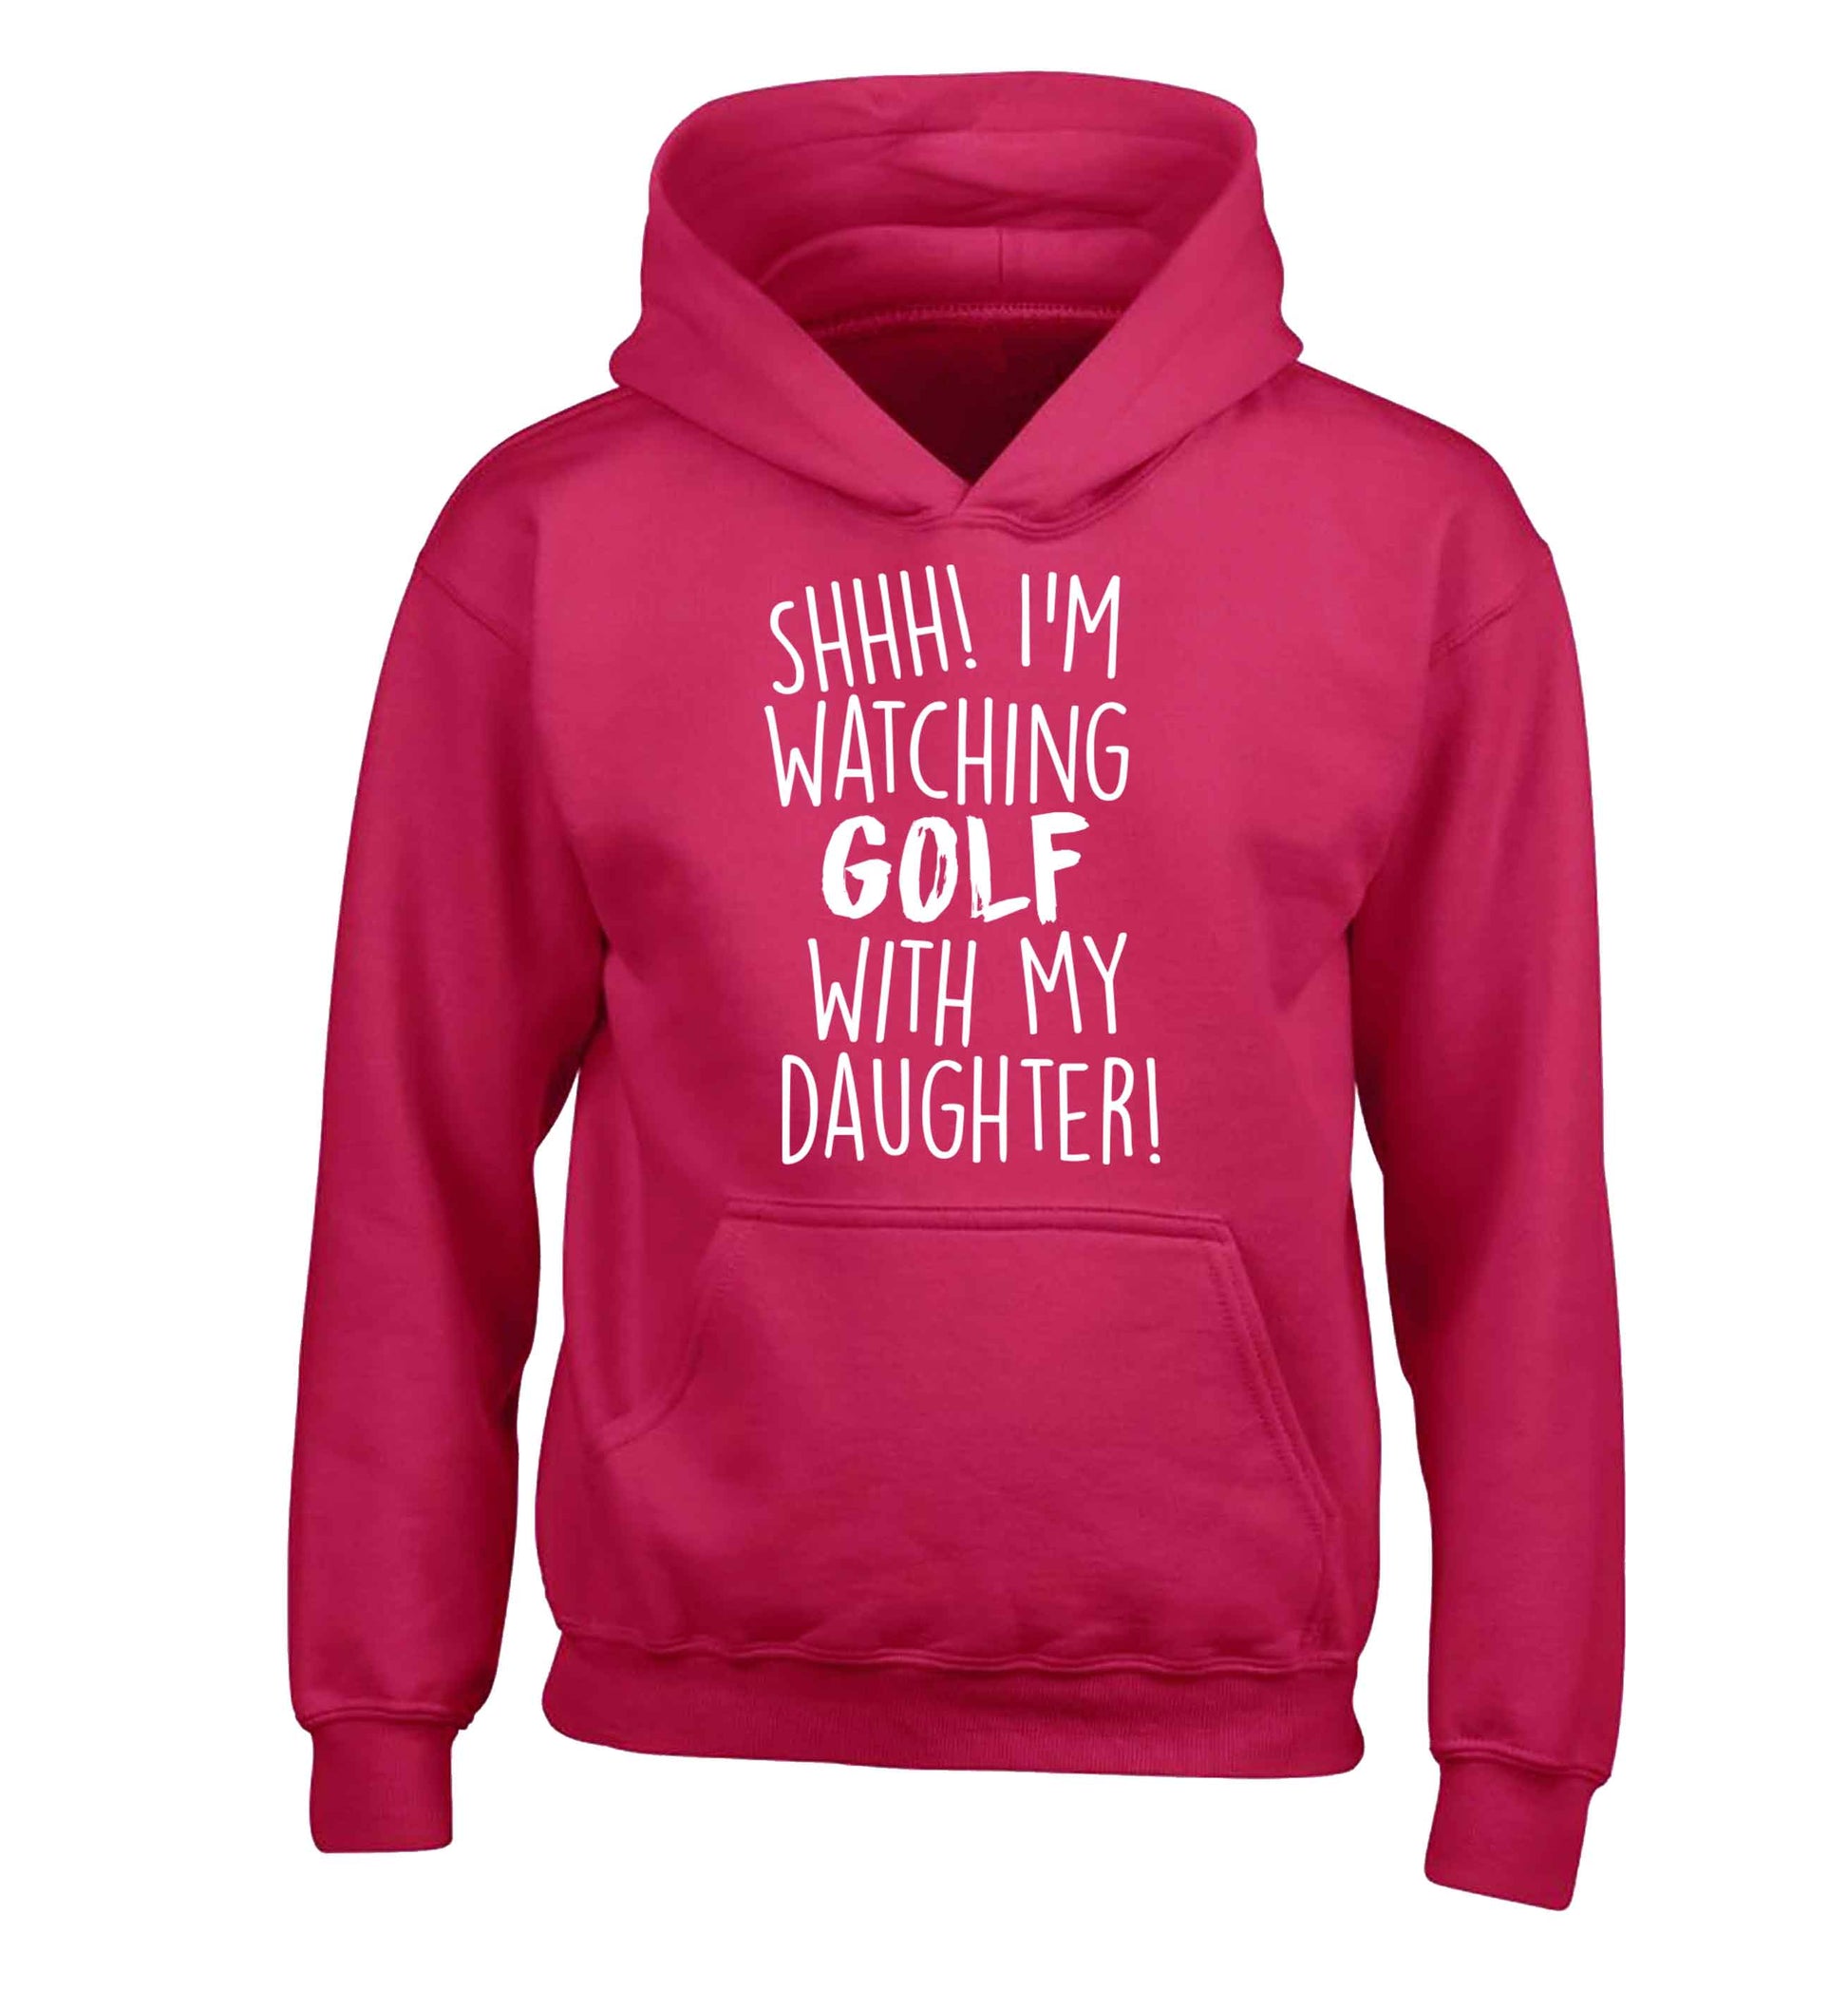 Shh I'm watching golf with my daughter children's pink hoodie 12-13 Years